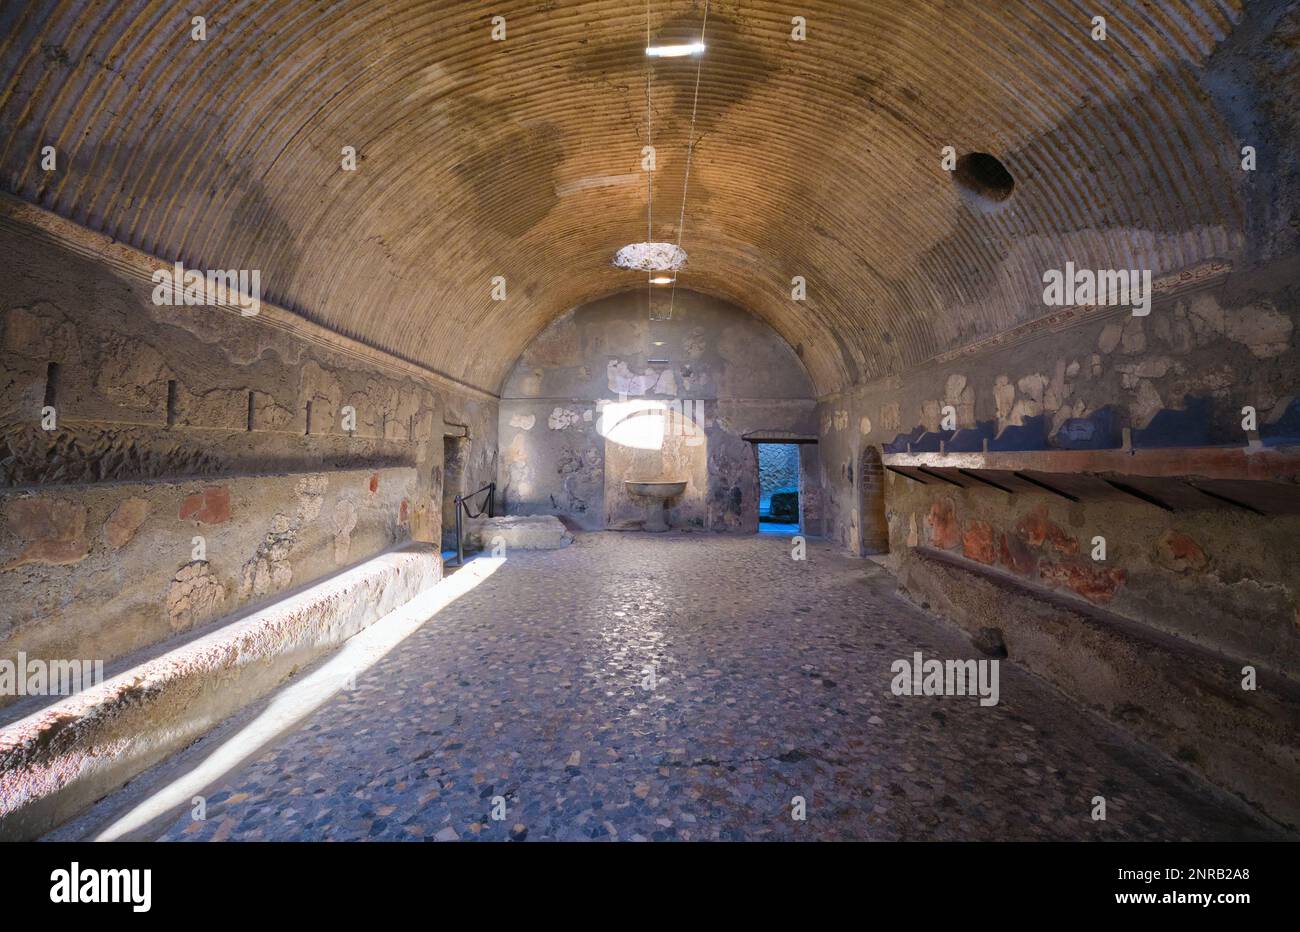 View of the arched room for bathing, washing, steam. At the Terme Maschili baths of the Roman ruin archeological town, city site of Herculaneum, near Stock Photo